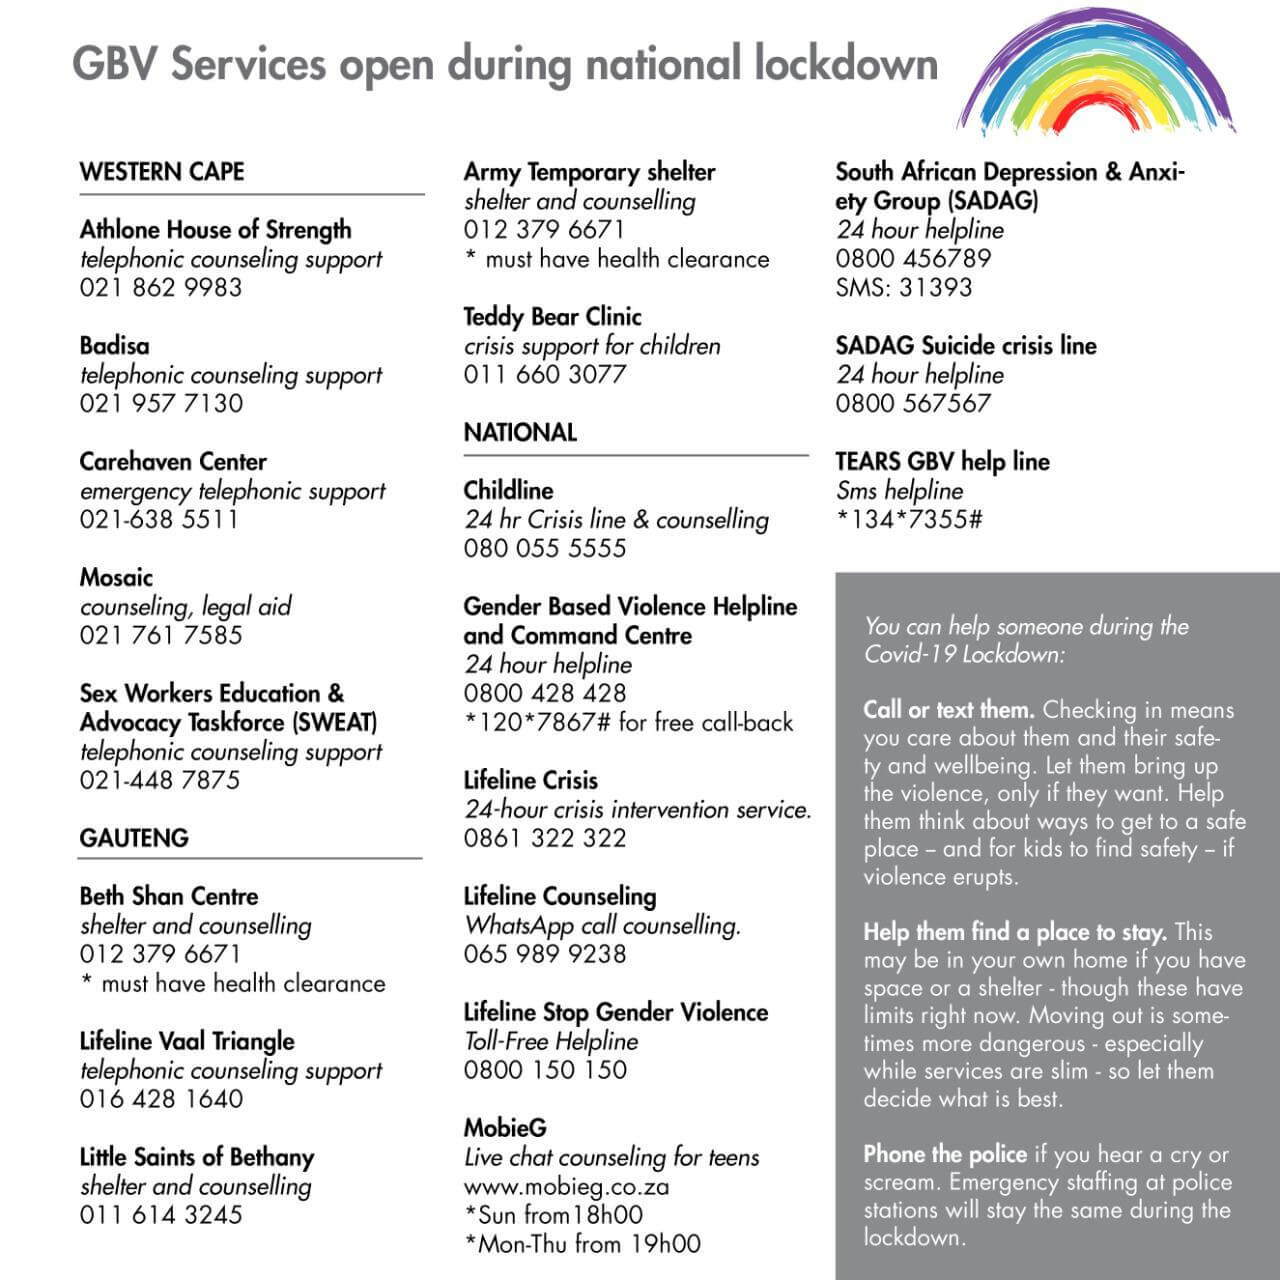 GBV Services